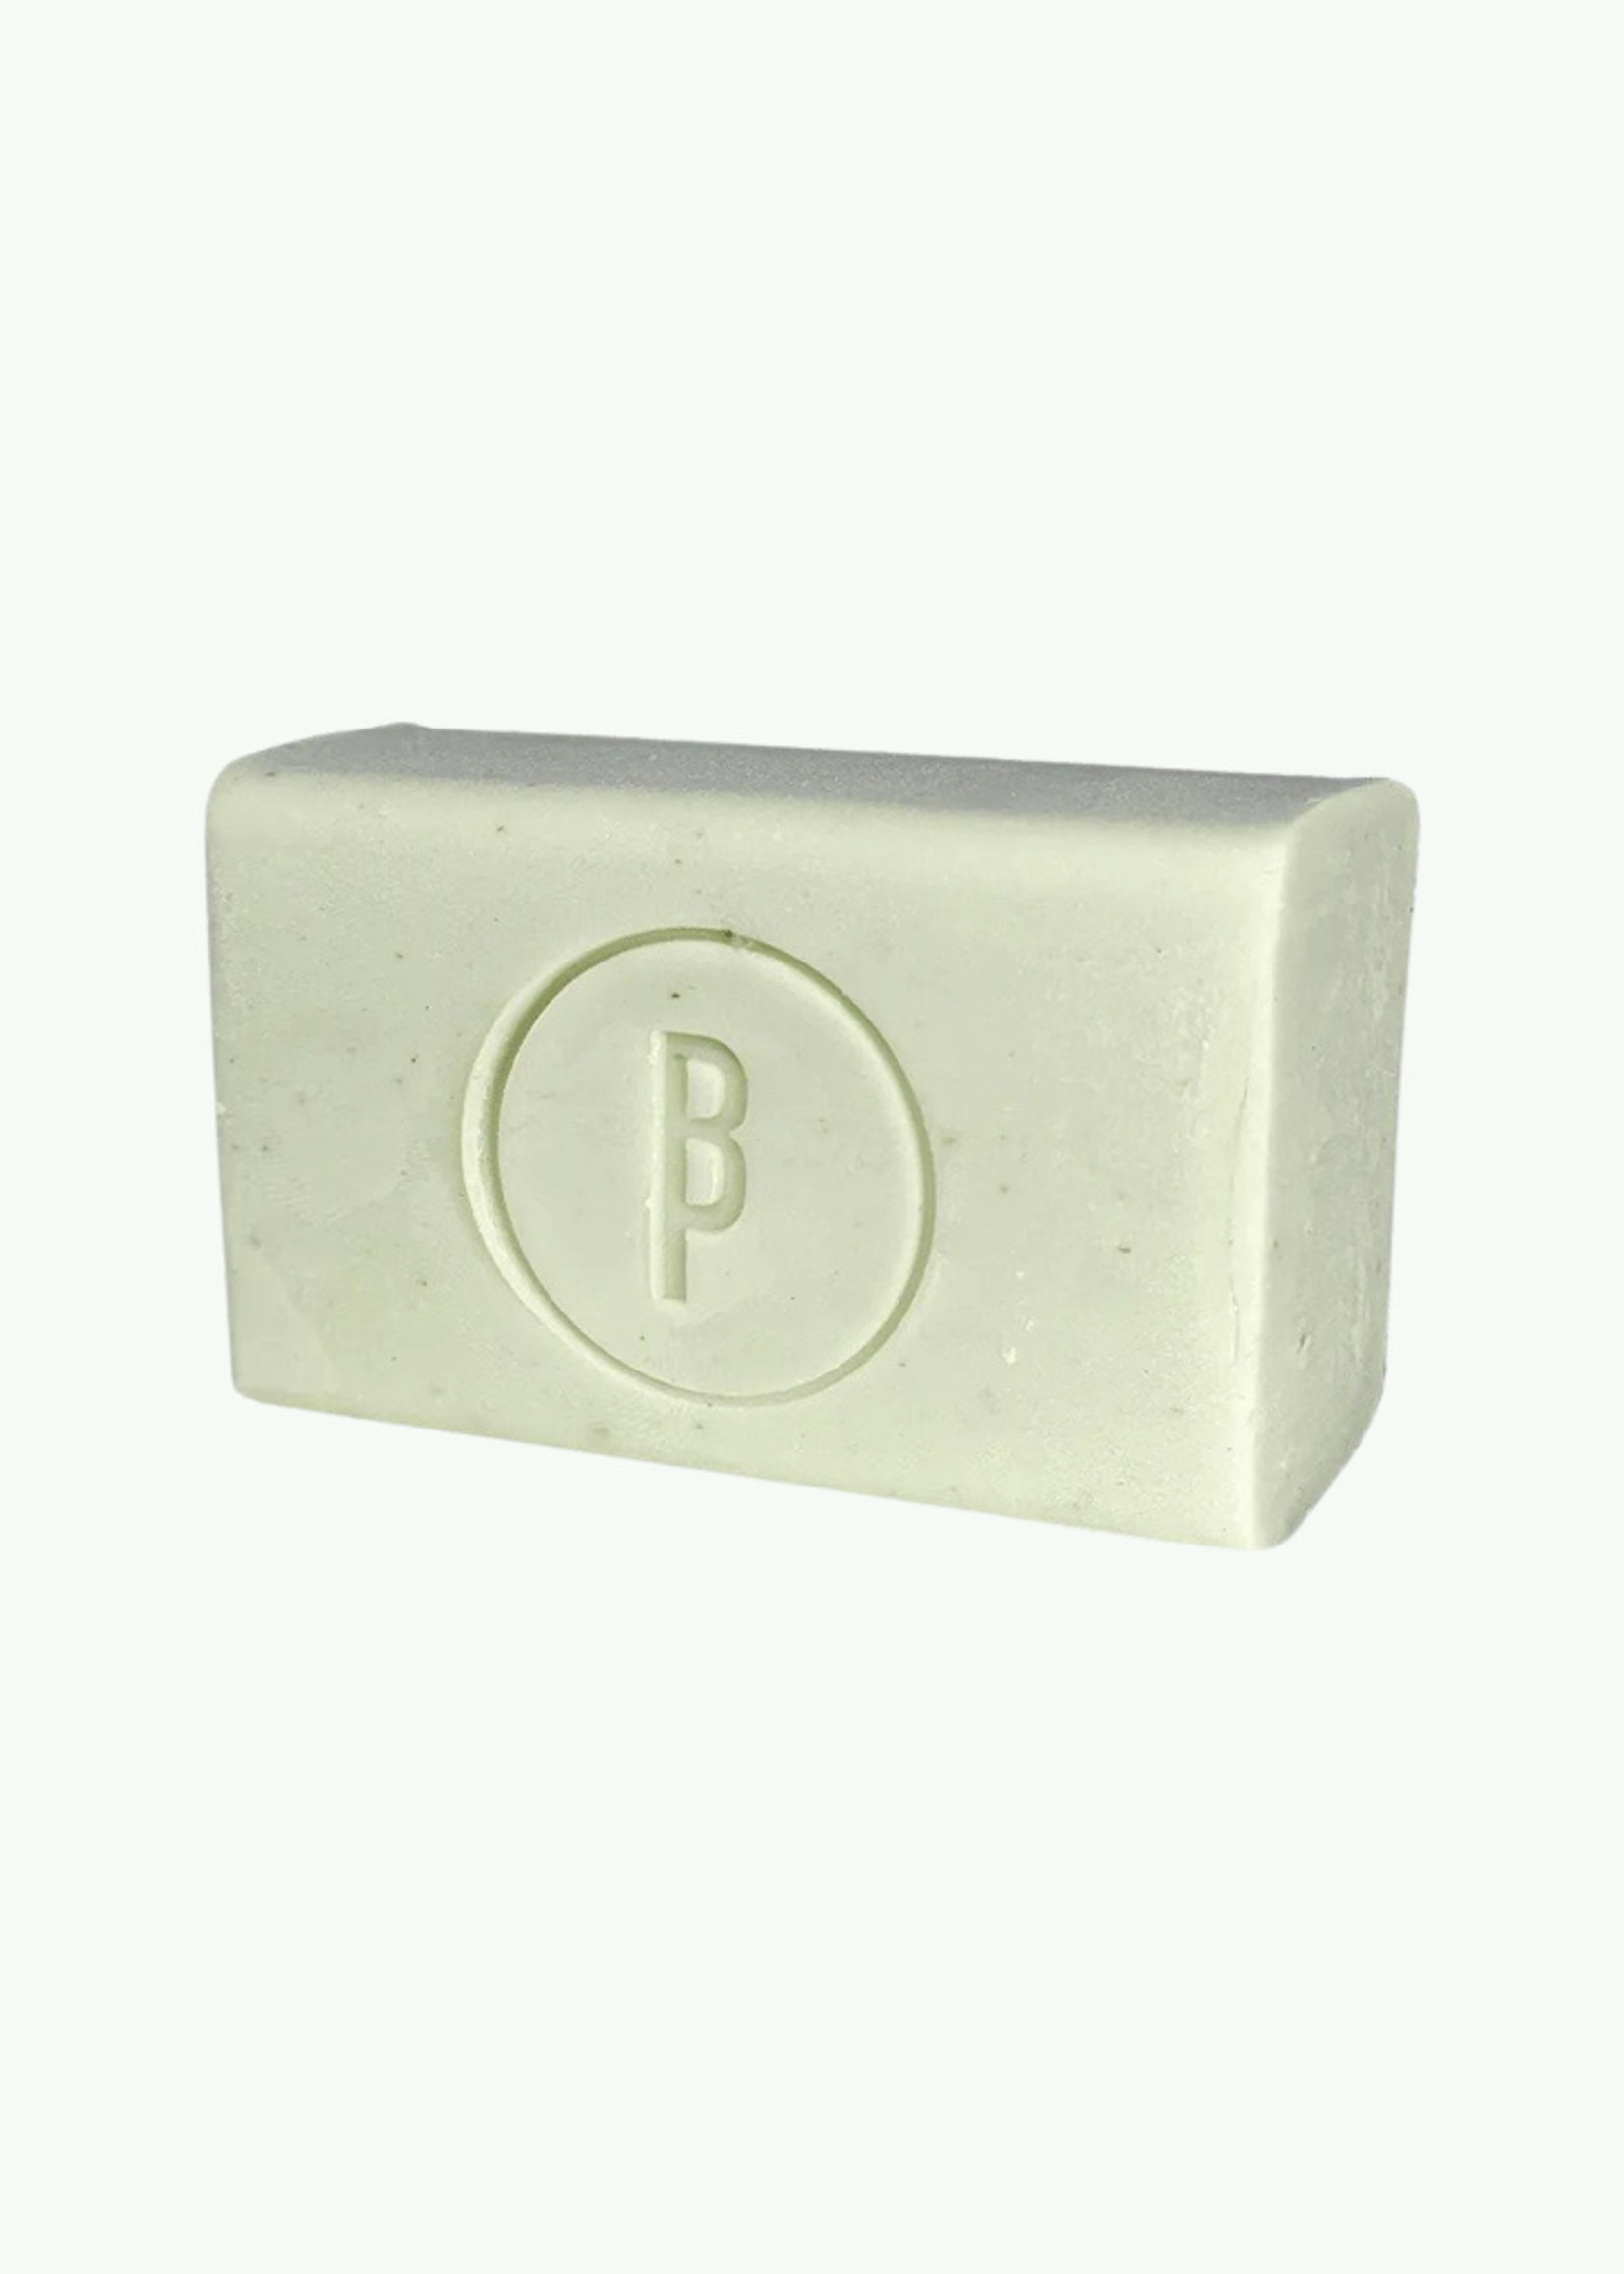 Savonneries Bruxelloises Brussels Beer Project x Savonneries Bruxelloises - Shower Power - Shampoo bar